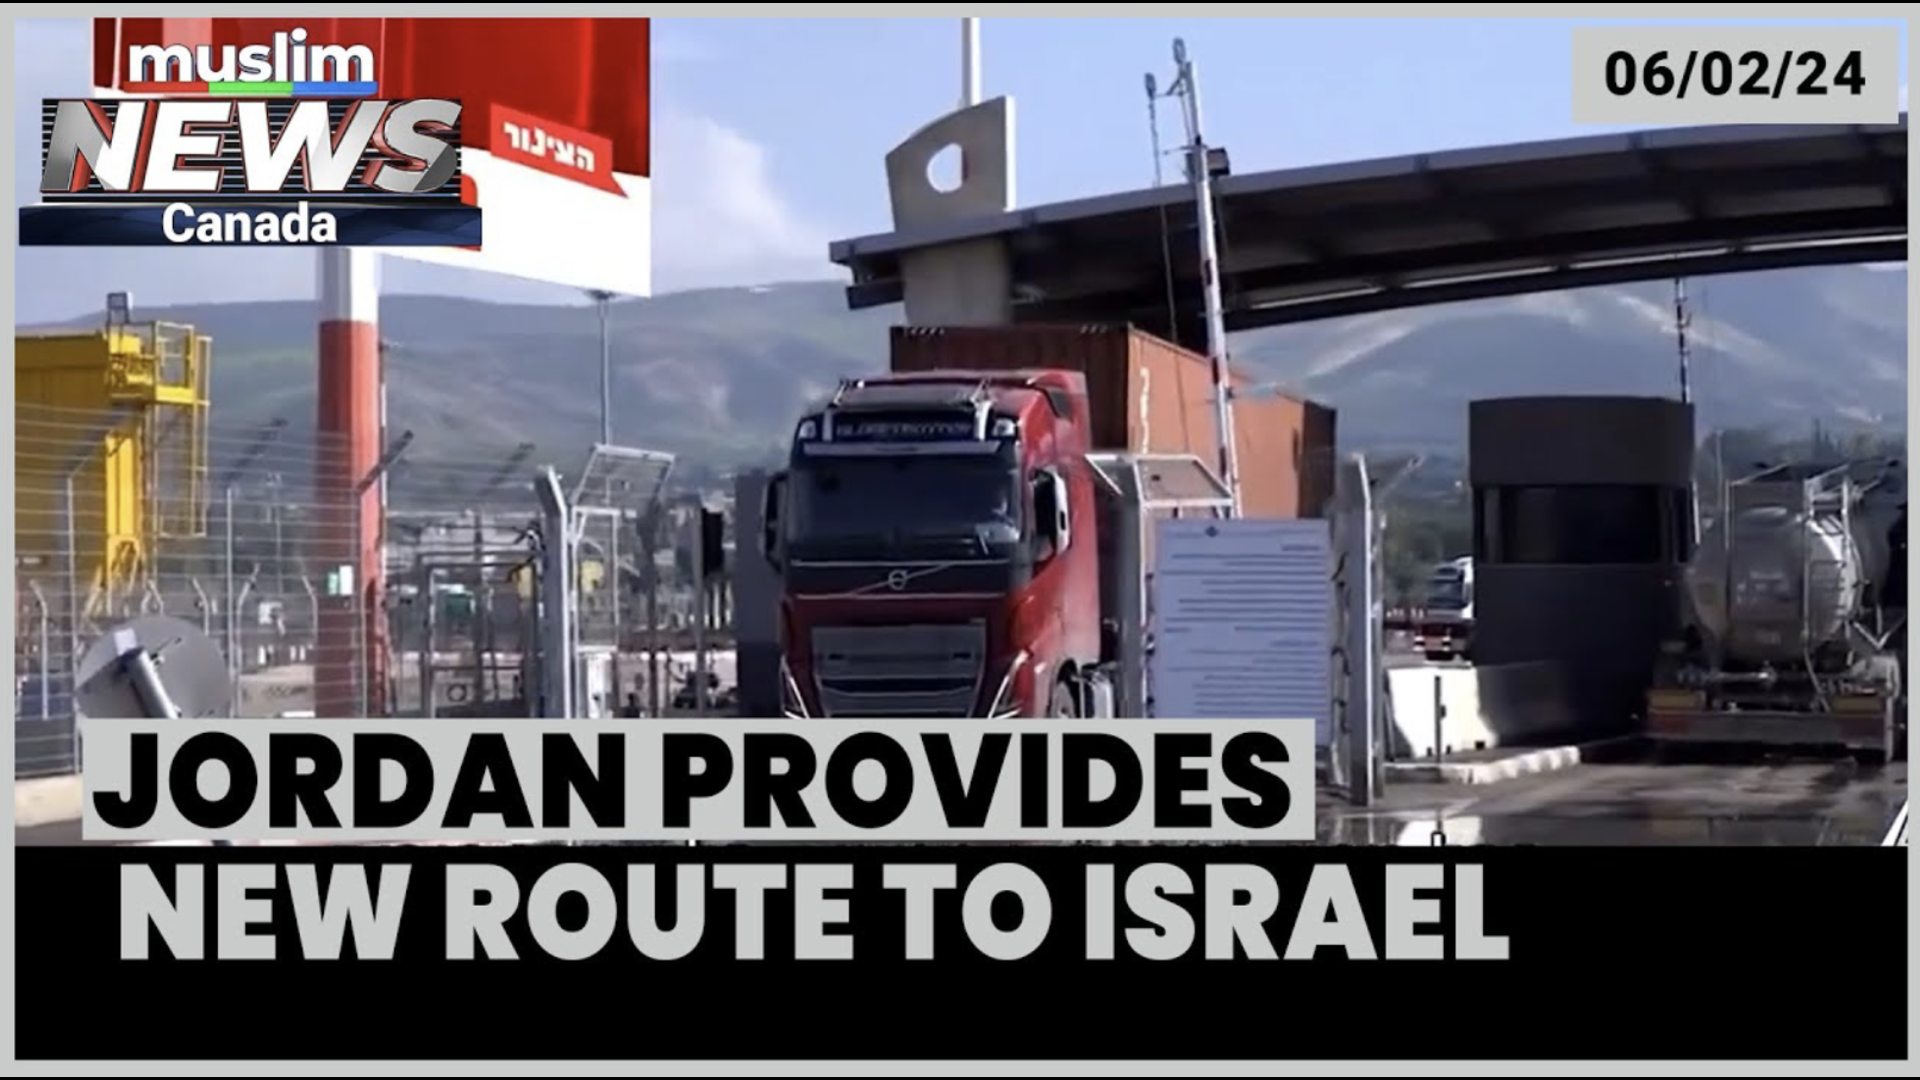 UAE Uses a New Land Route to Bypass Red Sea to Transport Goods to Israel | Feb 06, 2024